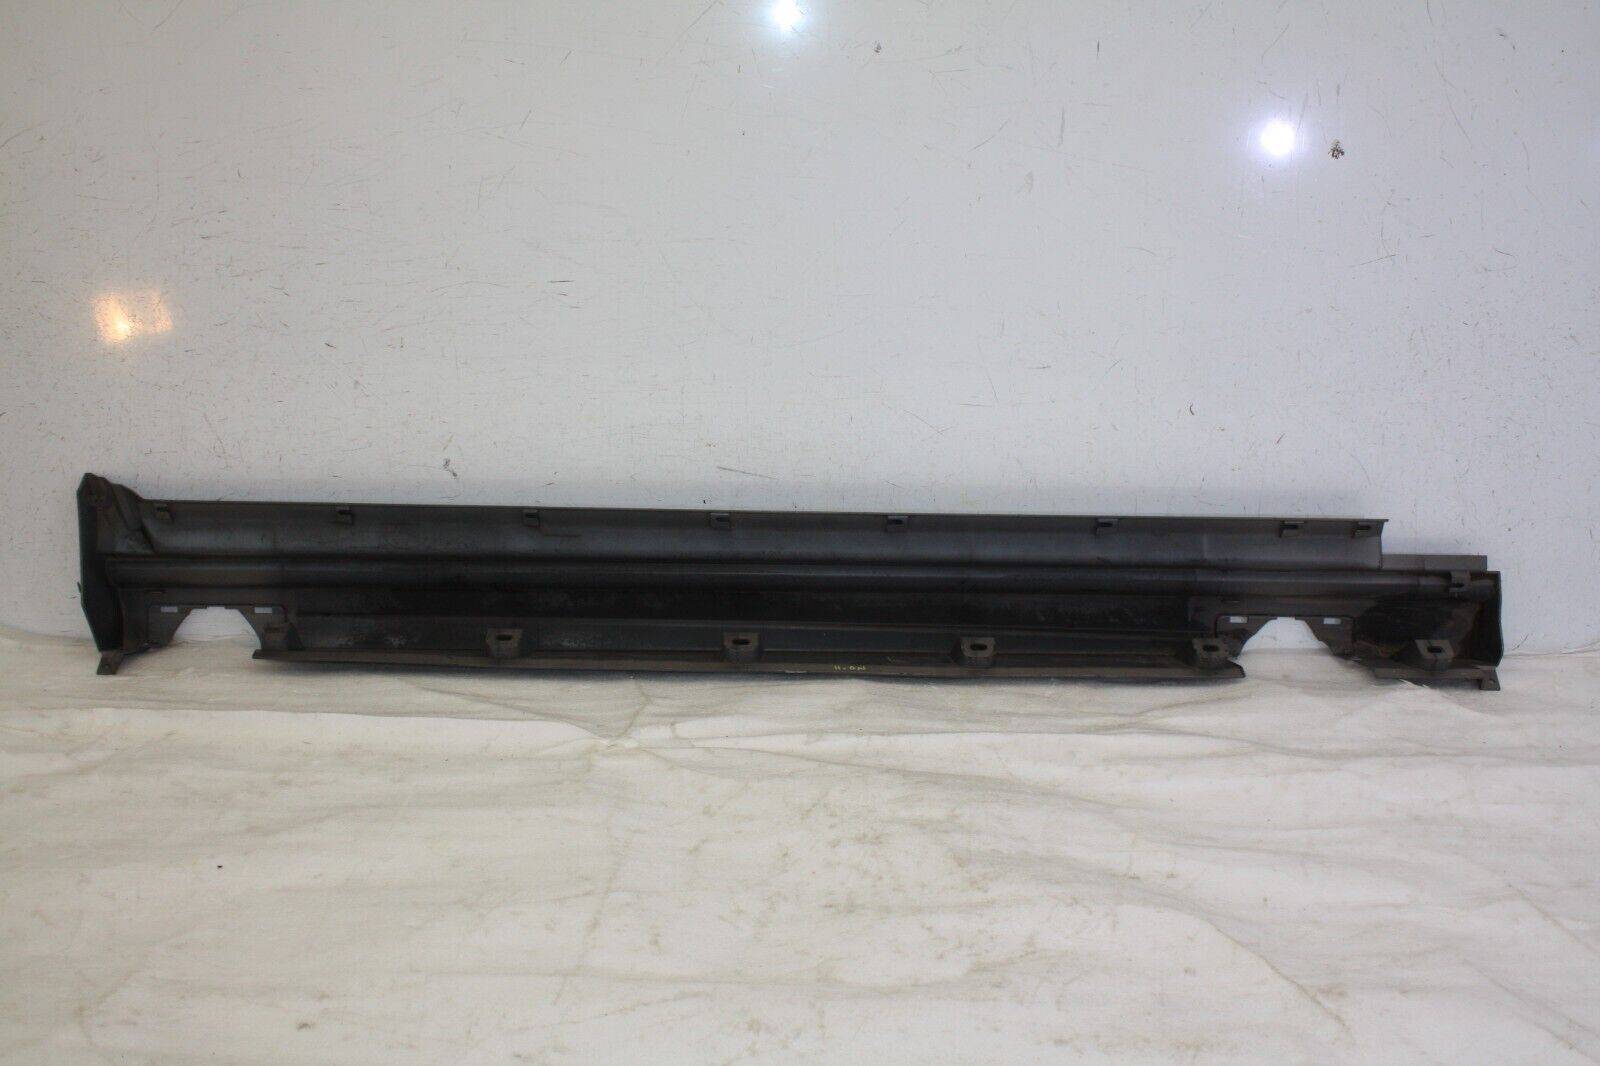 Range-Rover-Autobiography-Left-Side-Skirt-2009-TO-2012-BH4M-200B09-A-Genuine-176217123655-13